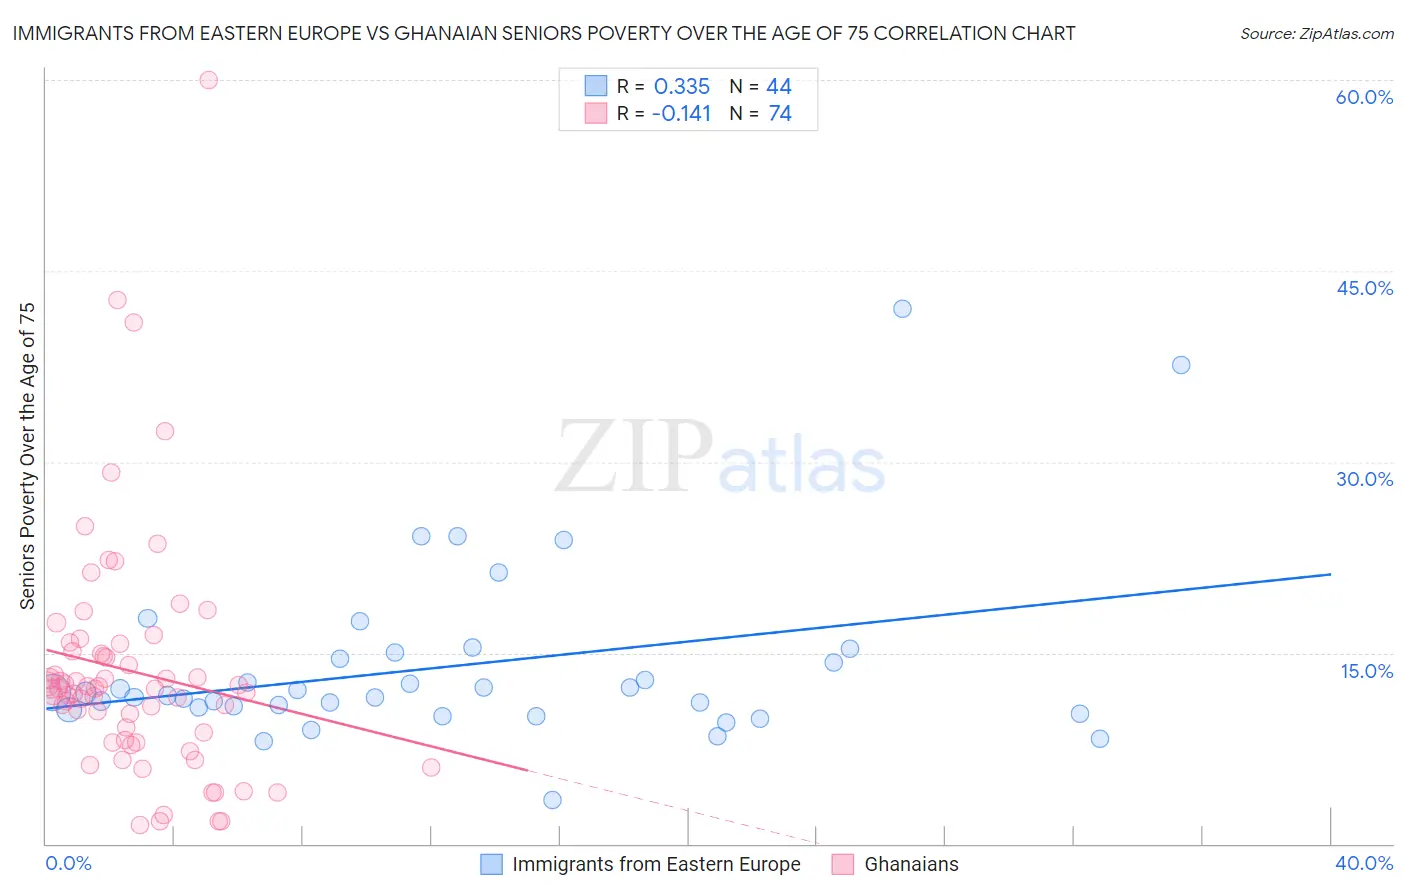 Immigrants from Eastern Europe vs Ghanaian Seniors Poverty Over the Age of 75